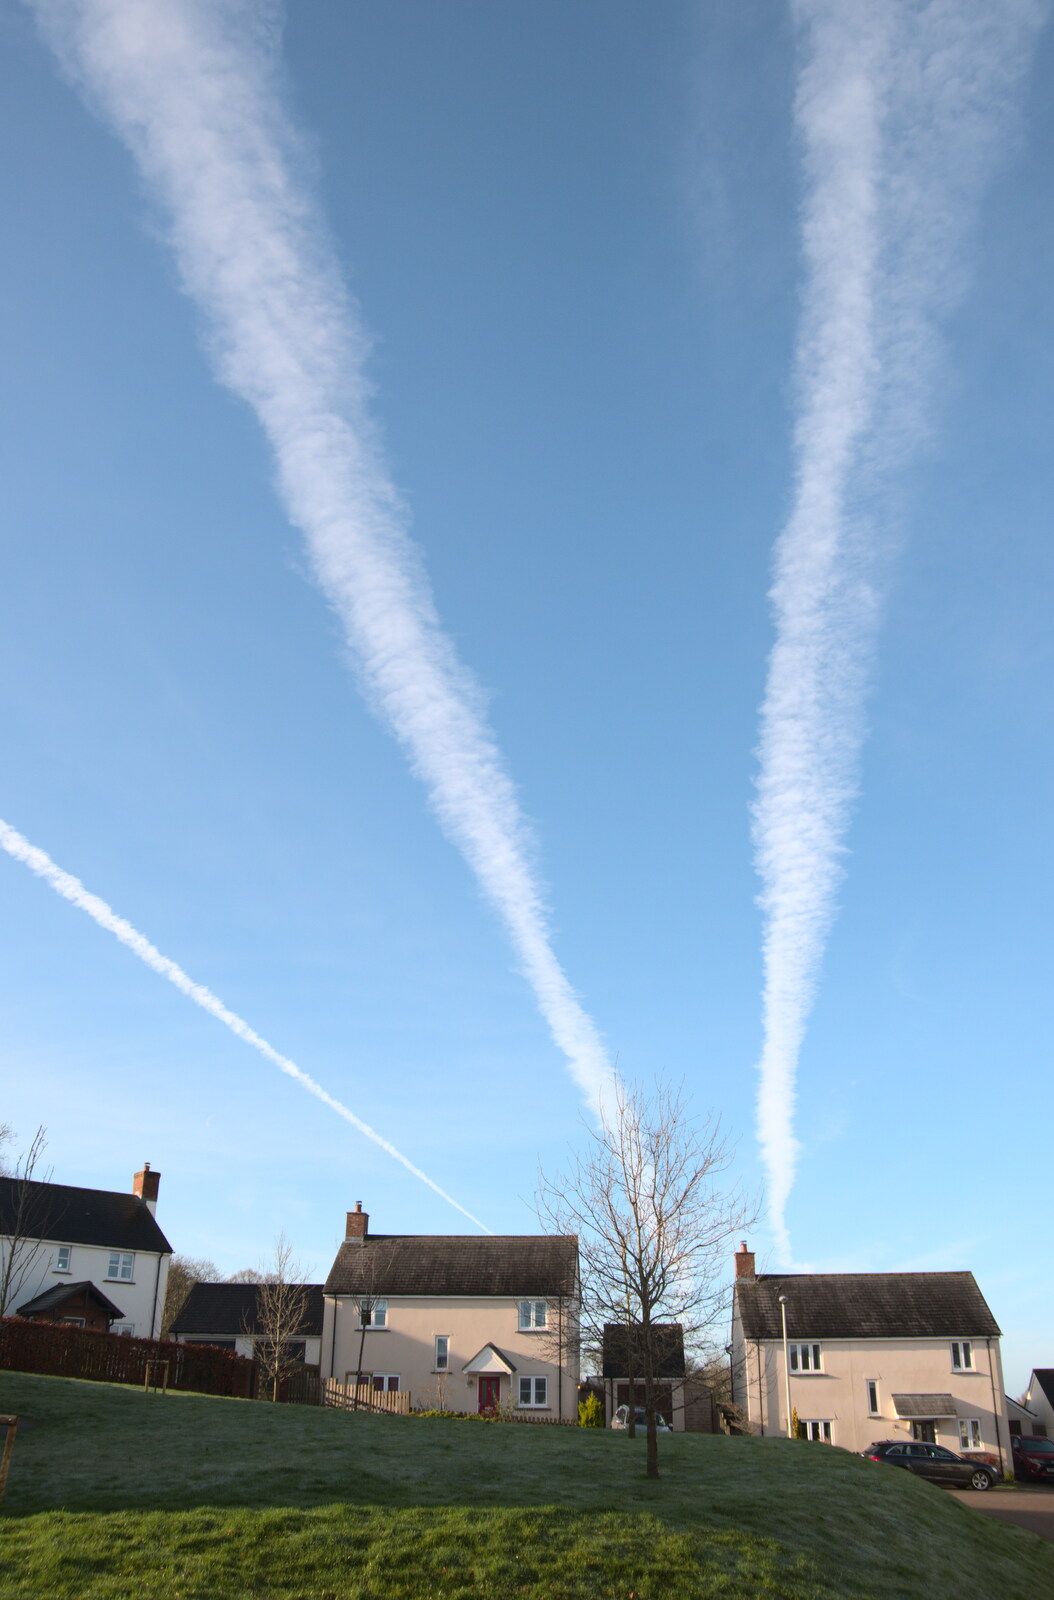 Three contrails over Chapel Park from A Short Trip to Spreyton, Devon - 18th January 2020